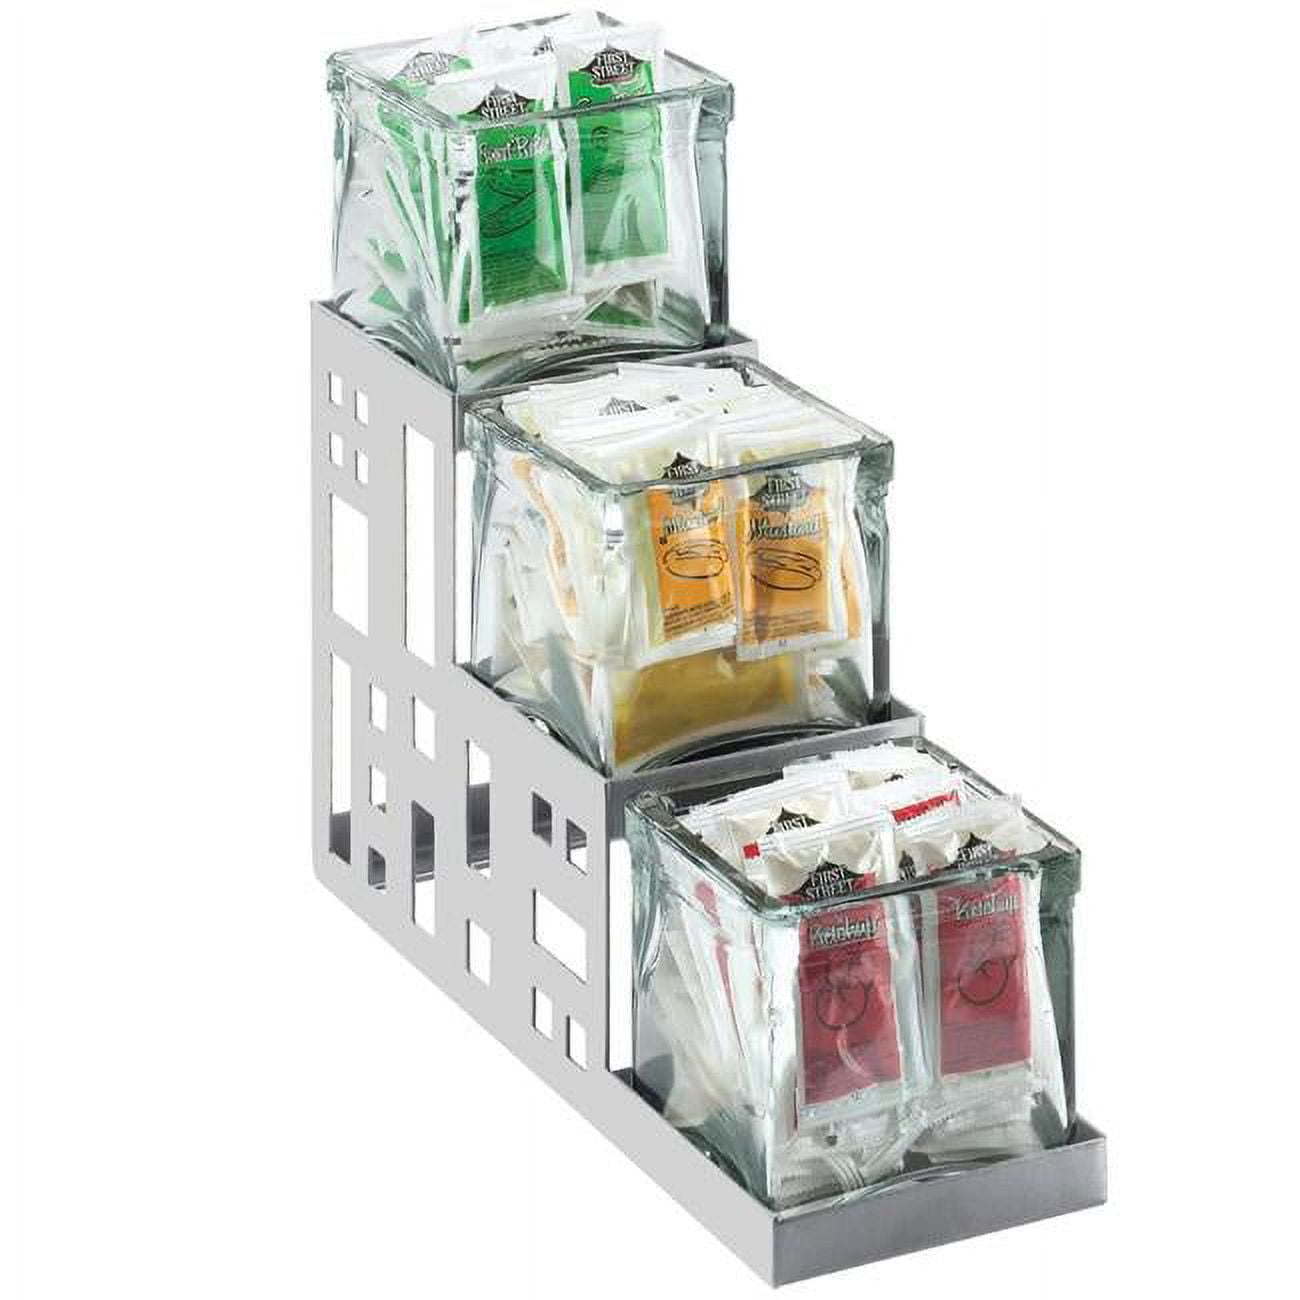 1604-55 Squared Stainless Steel 3 Jar Display - 4 X 12 X 10.5 In.